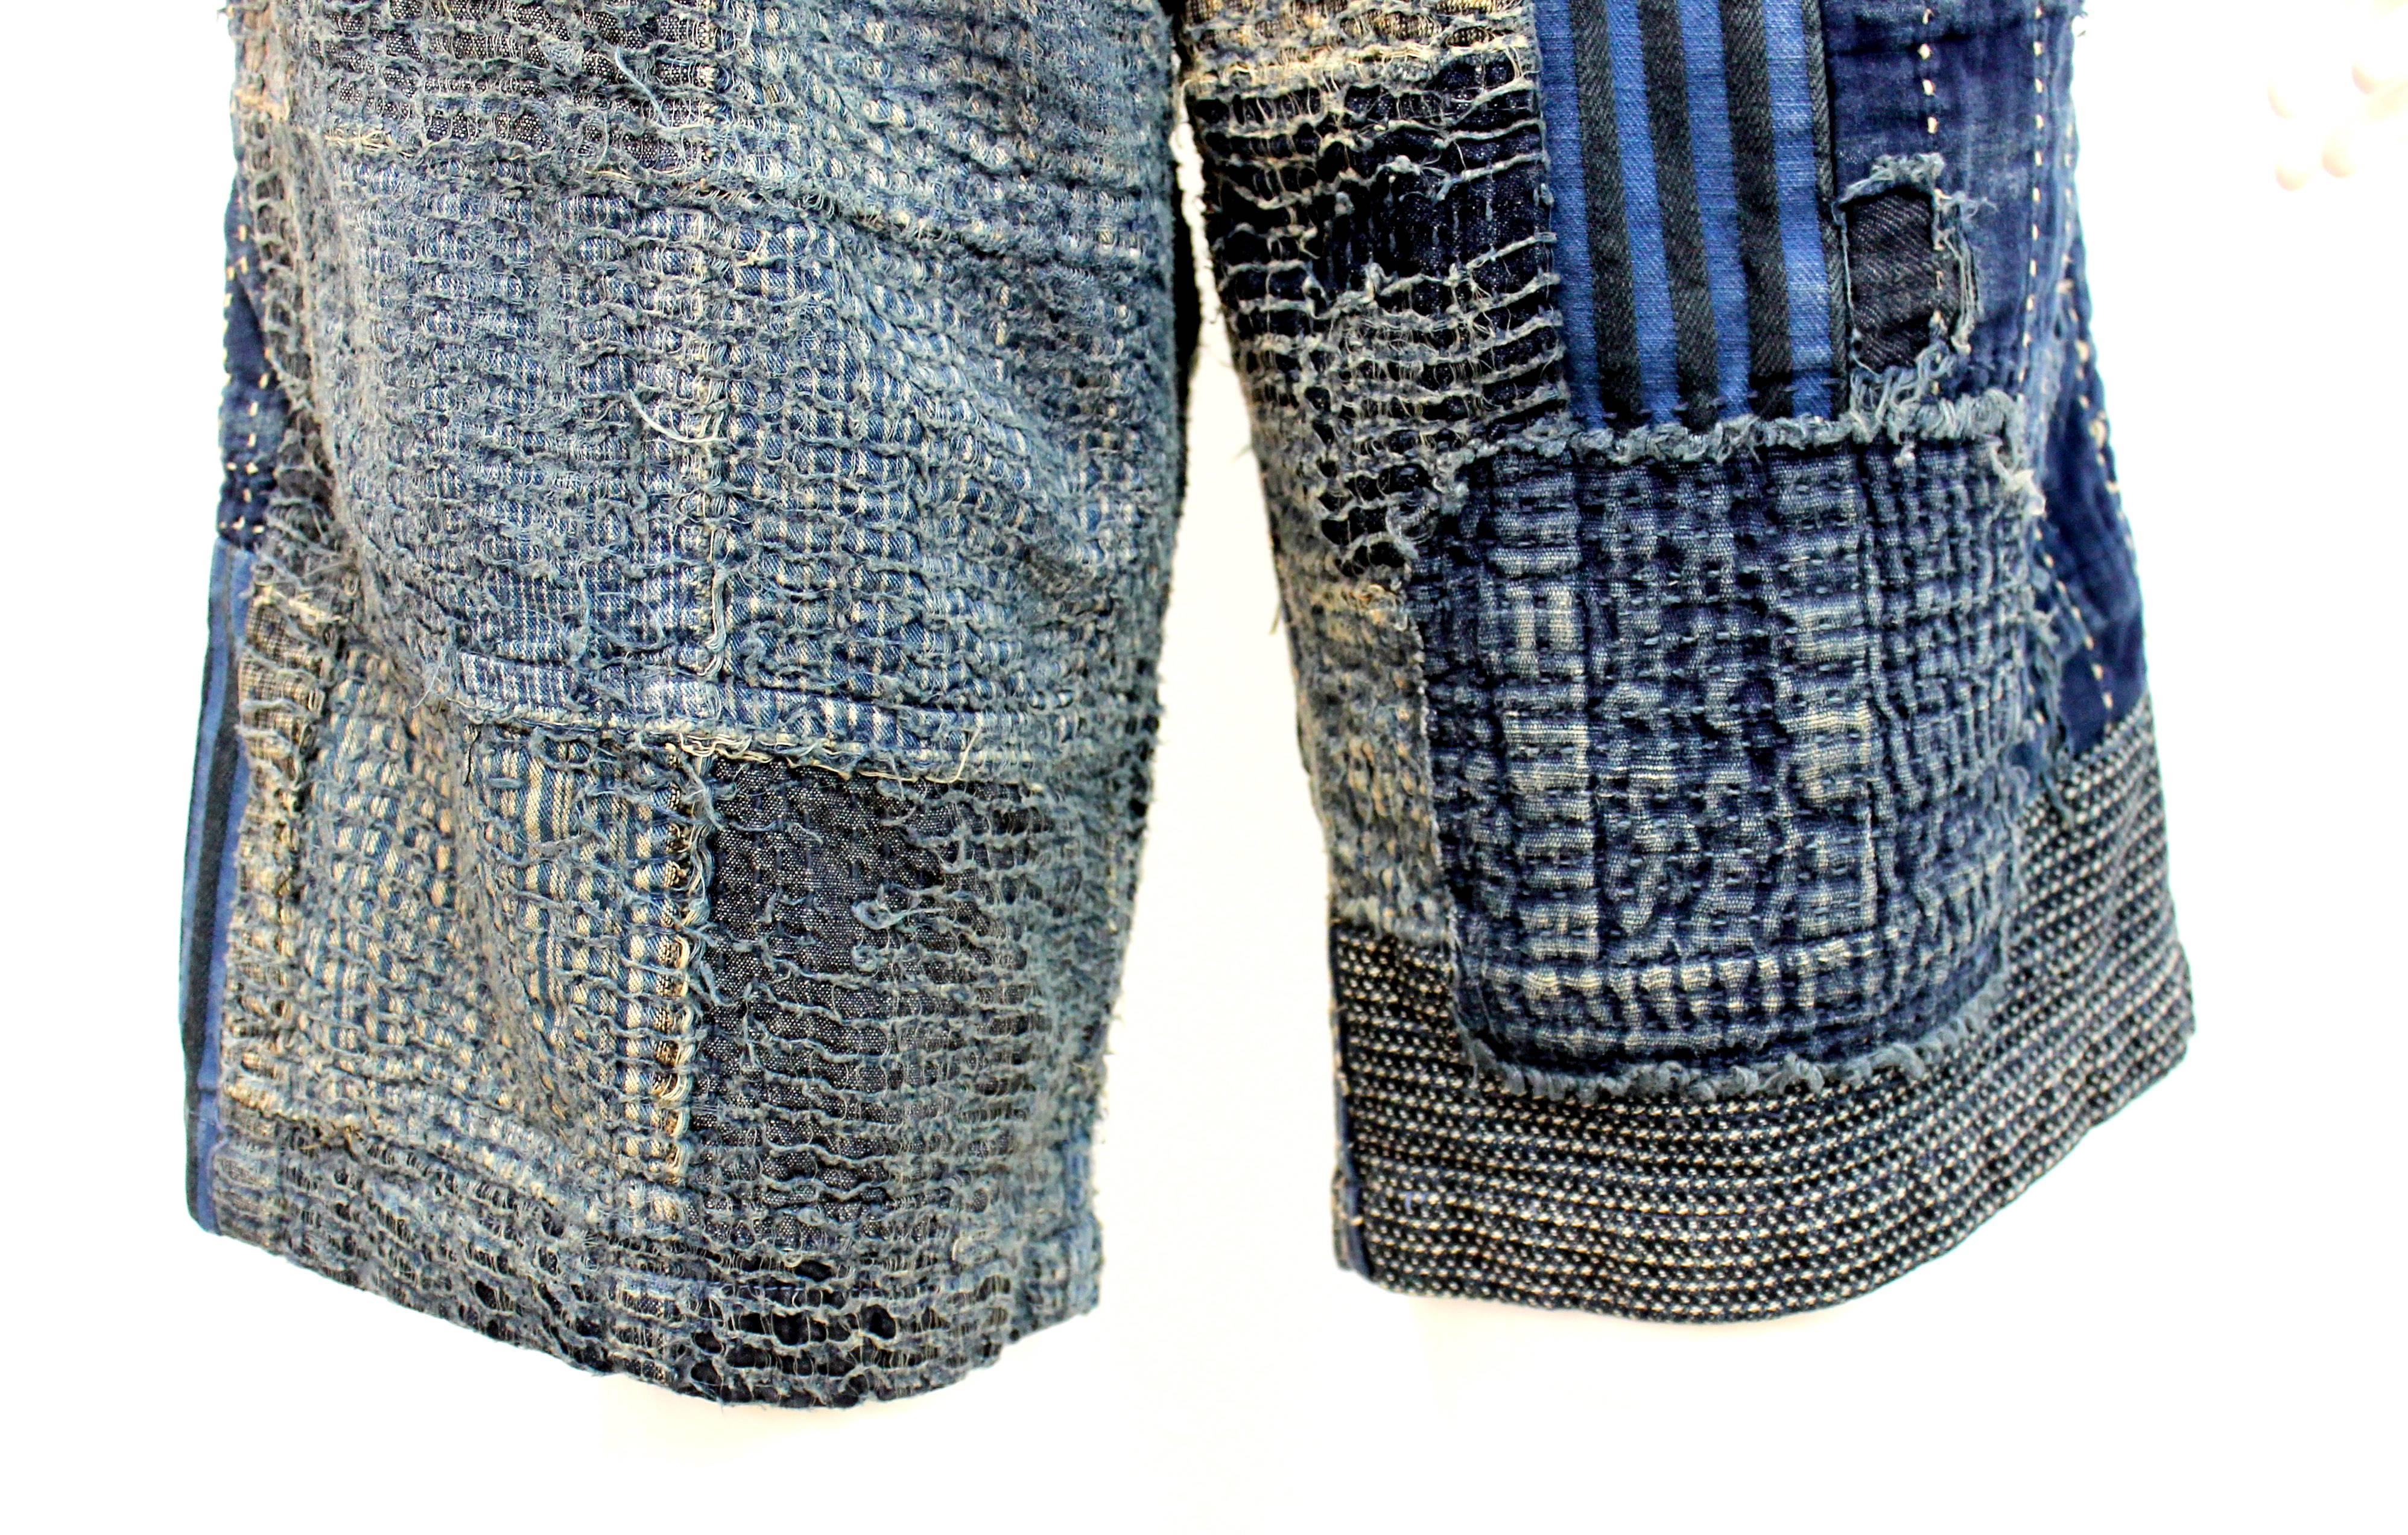 Unique Louis Vuitton denim patchwork shorts from the iconic brand Spring Summer 2013, designed by Kim Jones. Features incredible textured patches in many different shades of denim and cotton. 